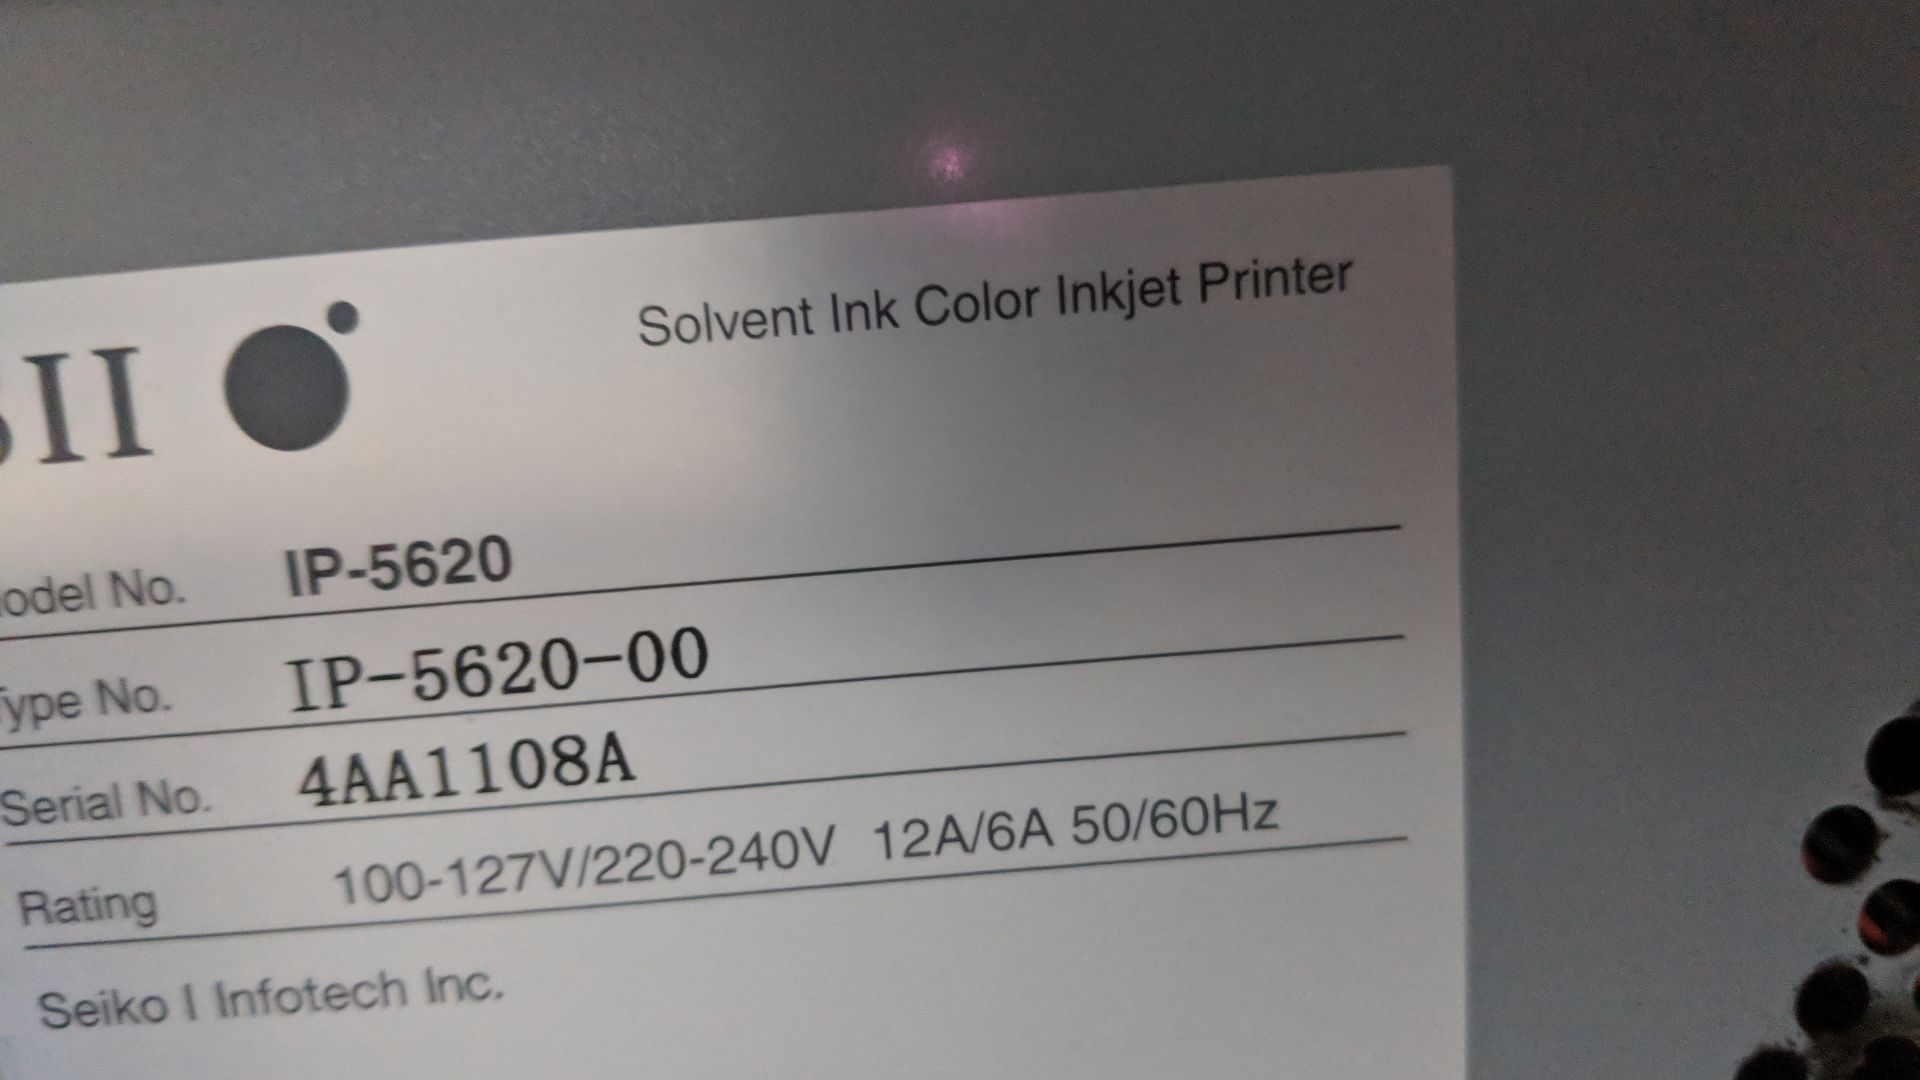 Seiko W-64S SII Color Painter Printer, serial no. 4AA1108A - Image 12 of 19